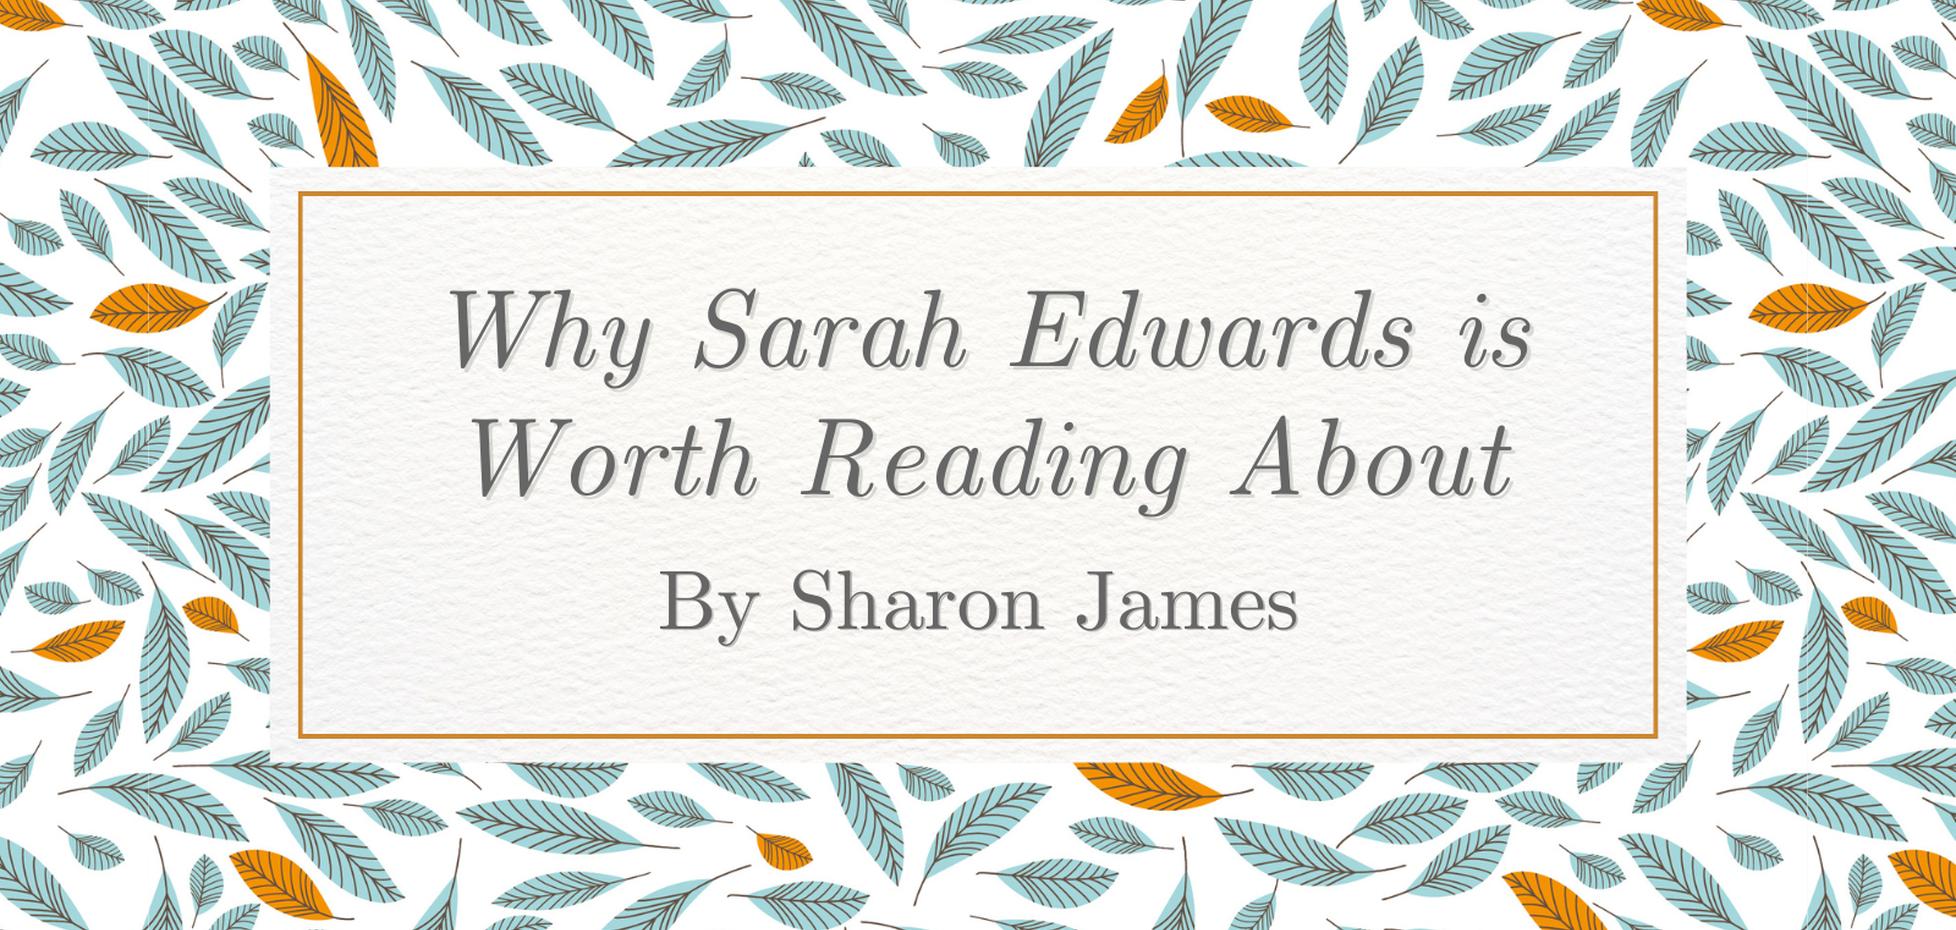 Why Sarah Edwards is Worth Reading About